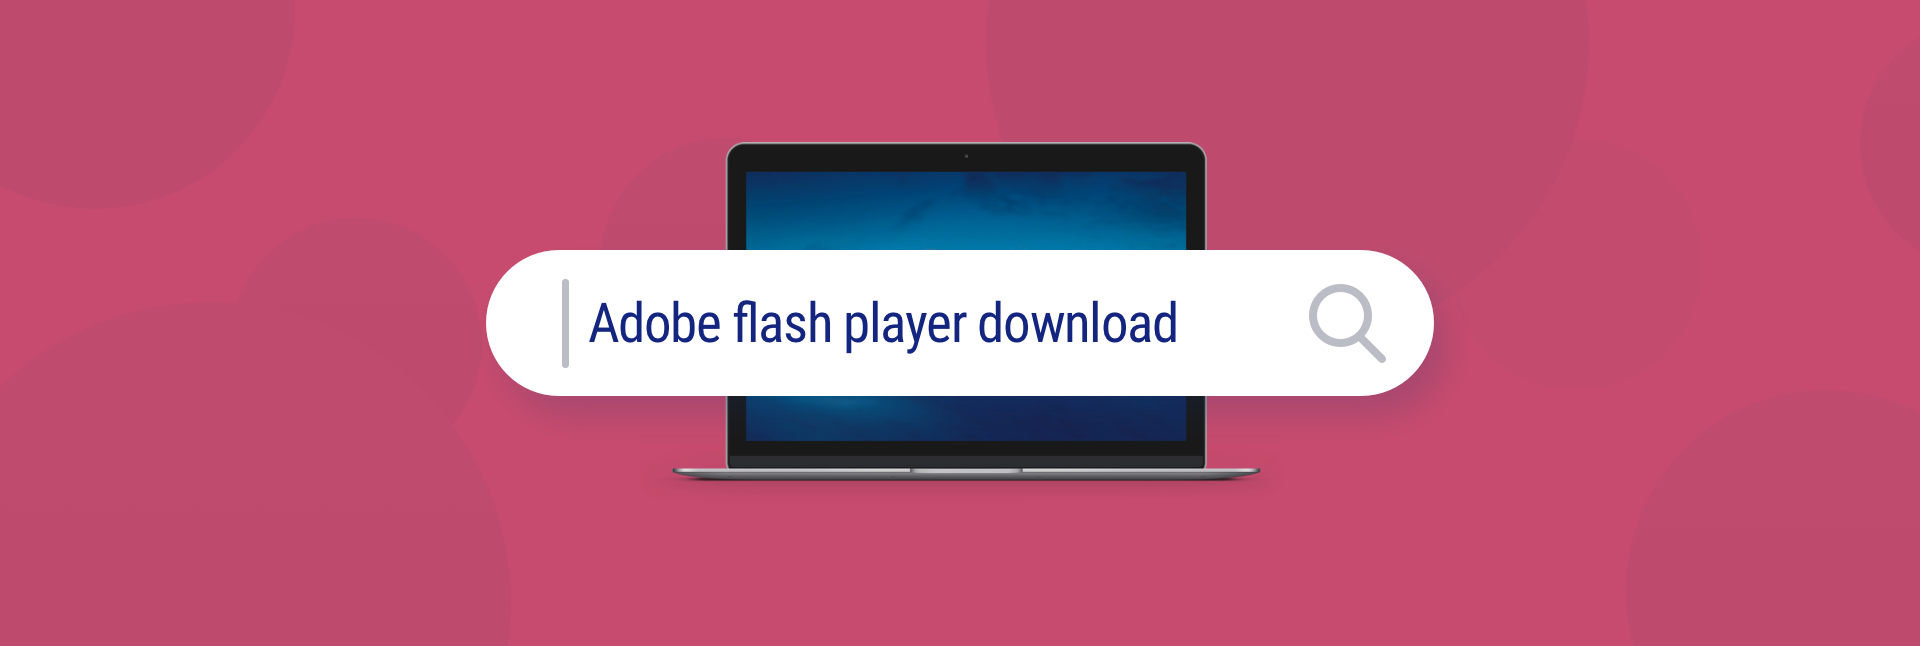 Download Latest Flashplayer For Mac